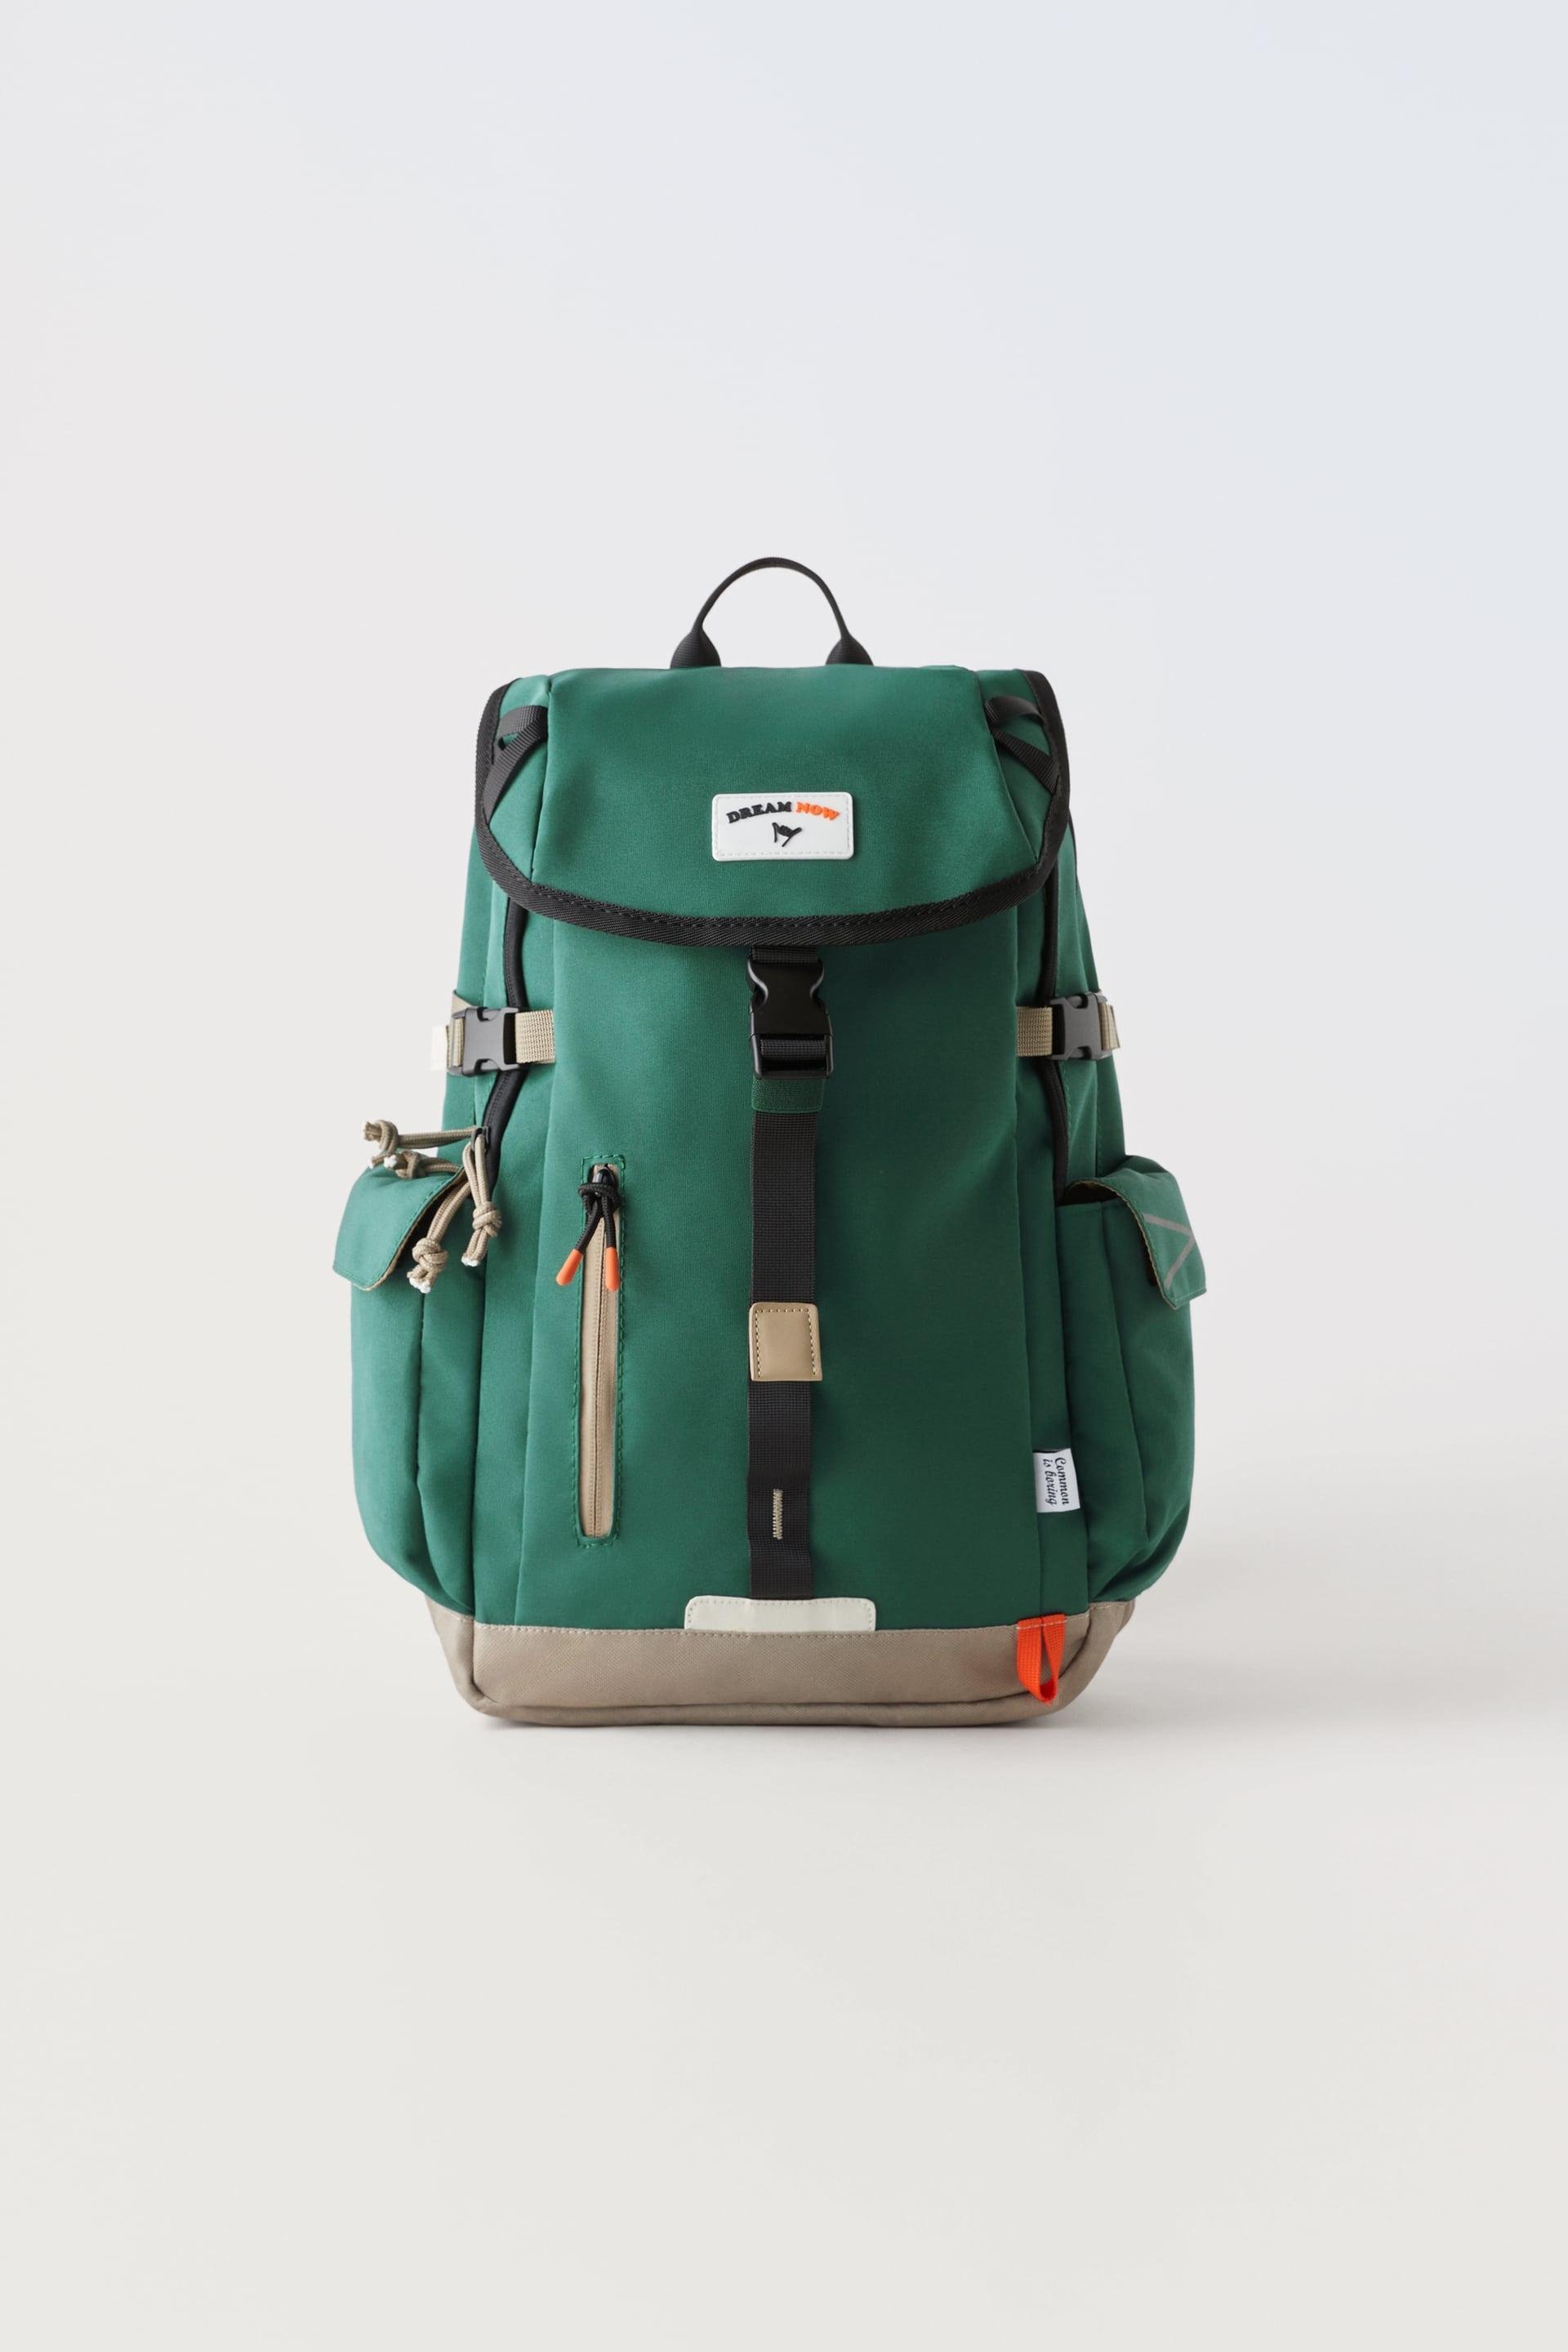 CAMPING BACKPACK by ZARA